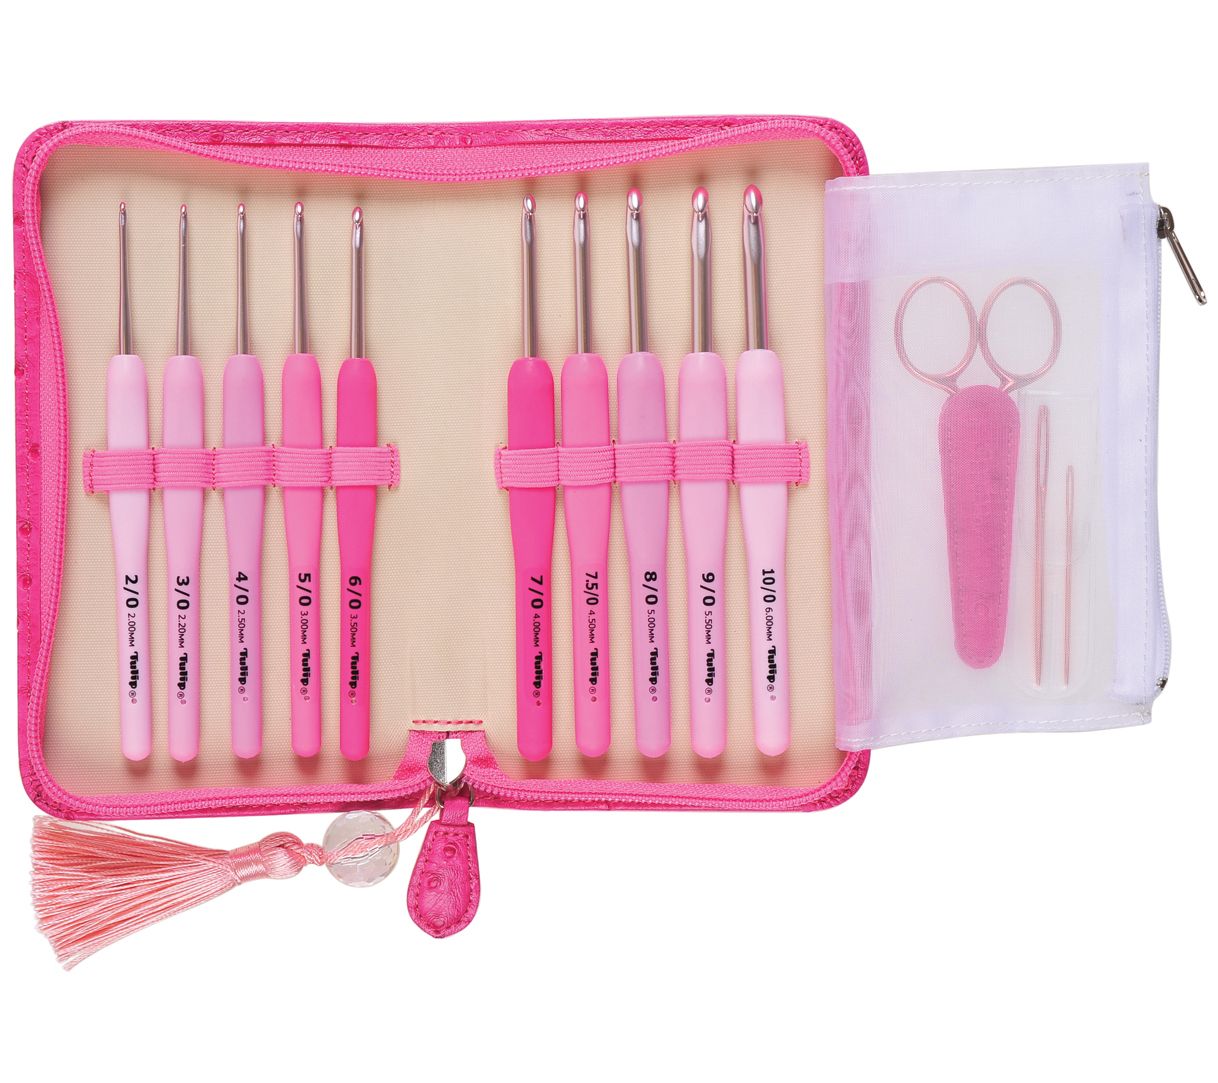 Tulip ETIMO Crochet Hook Set - 2 to 6 mm - with silver scissors